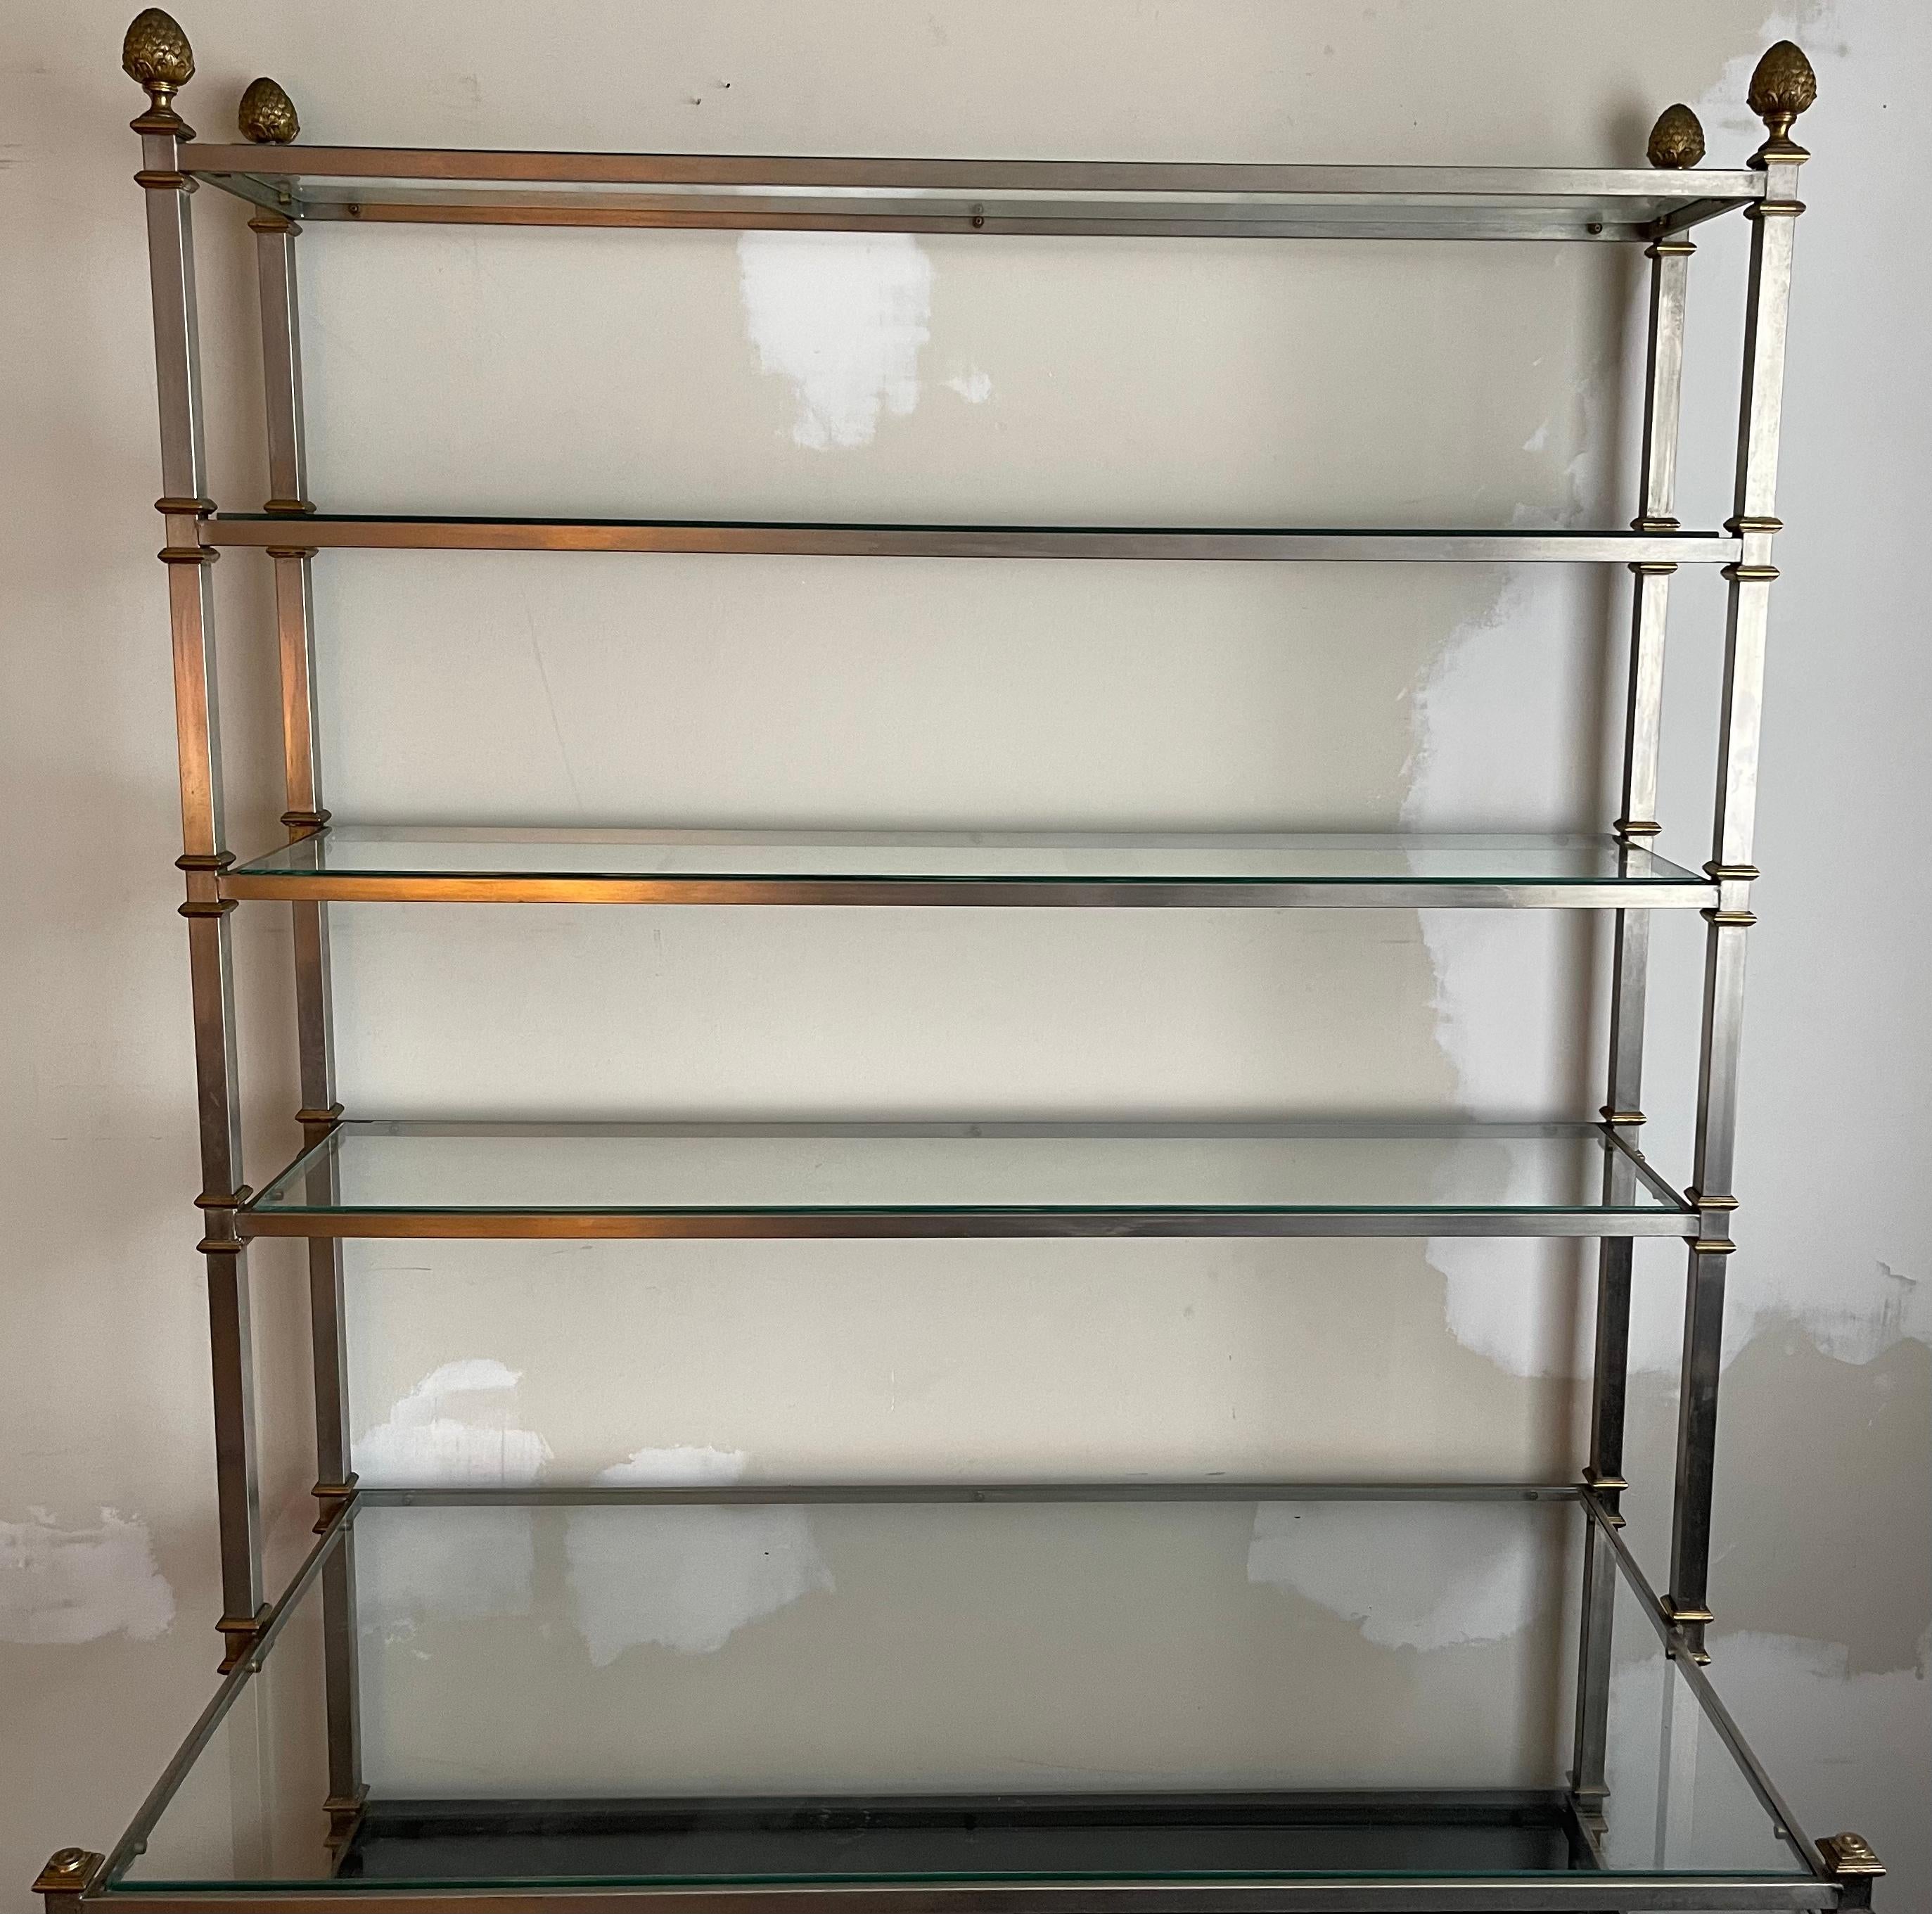 Maison Jansen style neoclassical large bookcase or etagere. Brushed steel frame with brass accents. Bottom shelves are made of black wood and upper shelves are as found clear glass. No makers mark or signature. 
Bottom shelves measure:
Middle